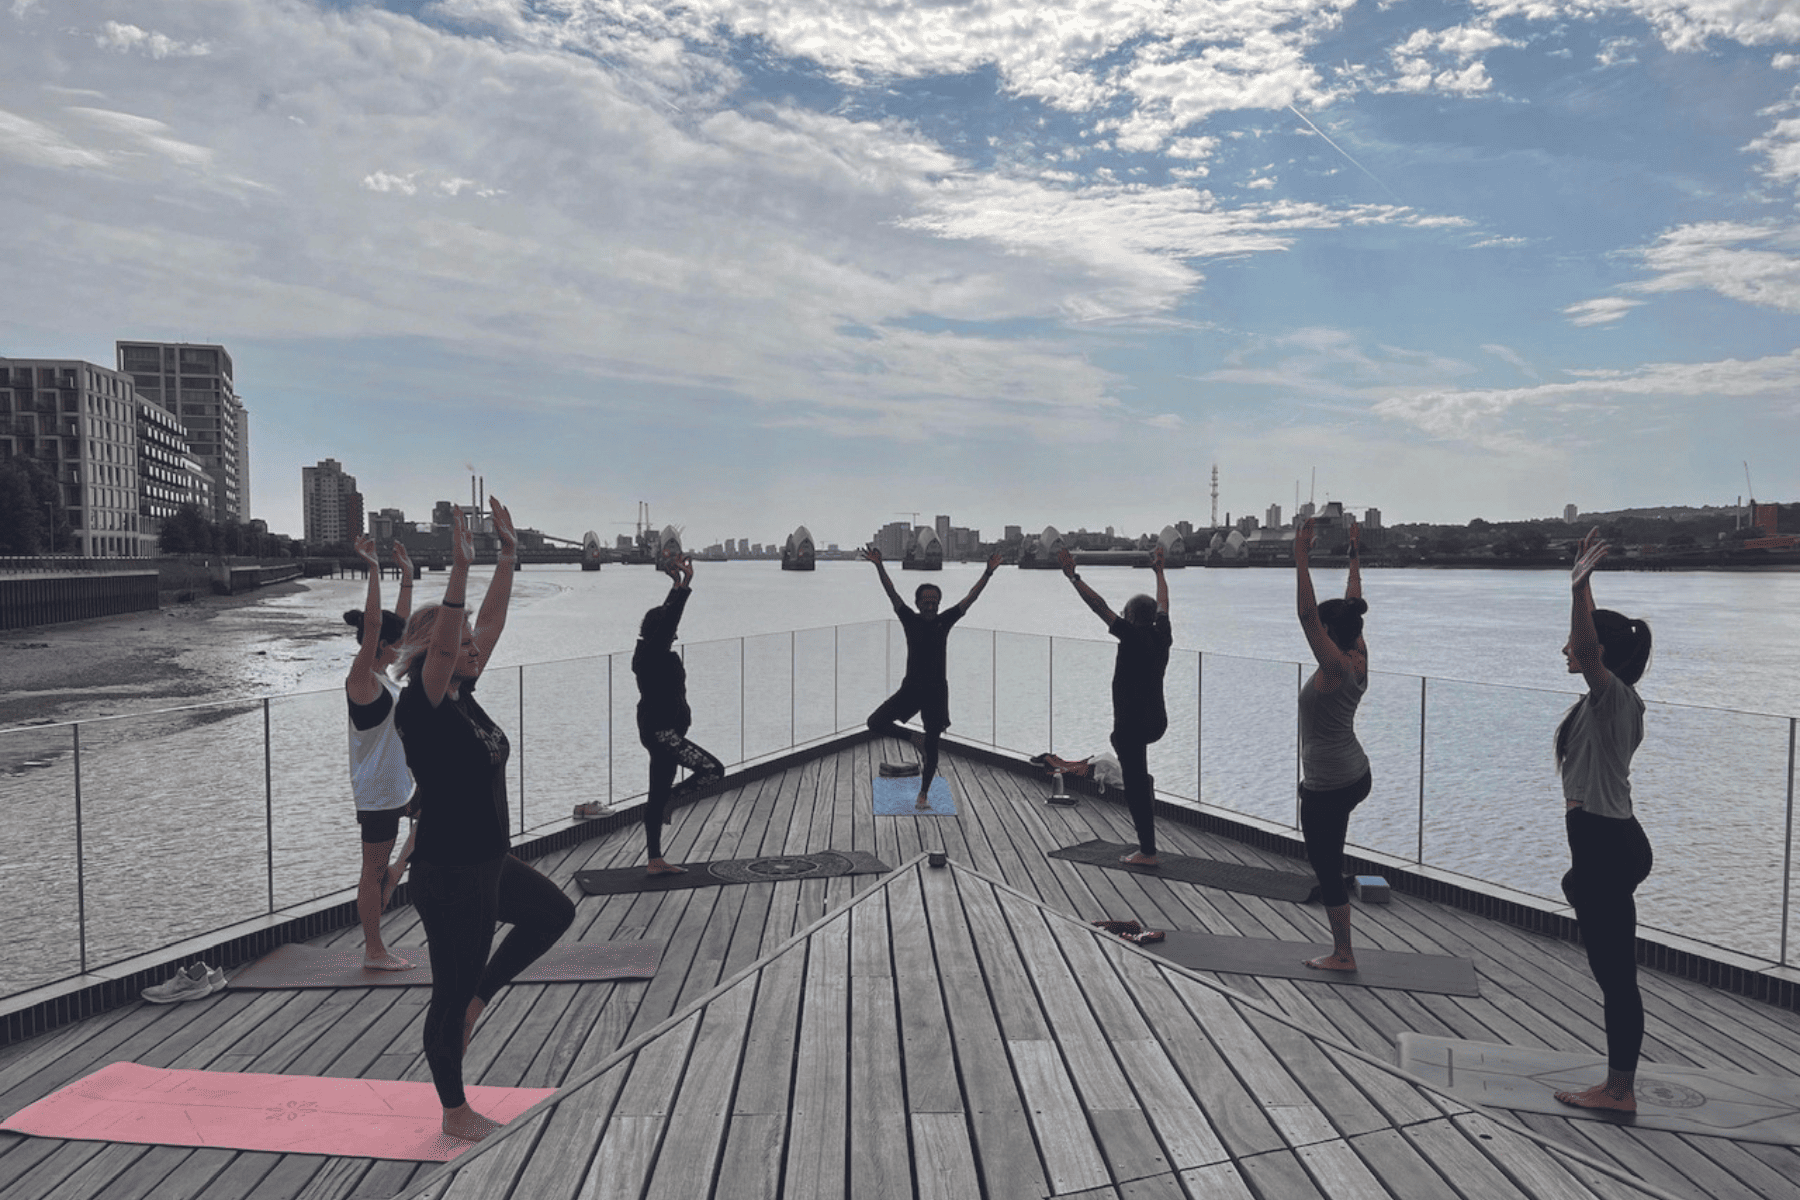 Peter Chung teaching at Pontoon Dock Pier by the Thames Barrier Yoga is for every body